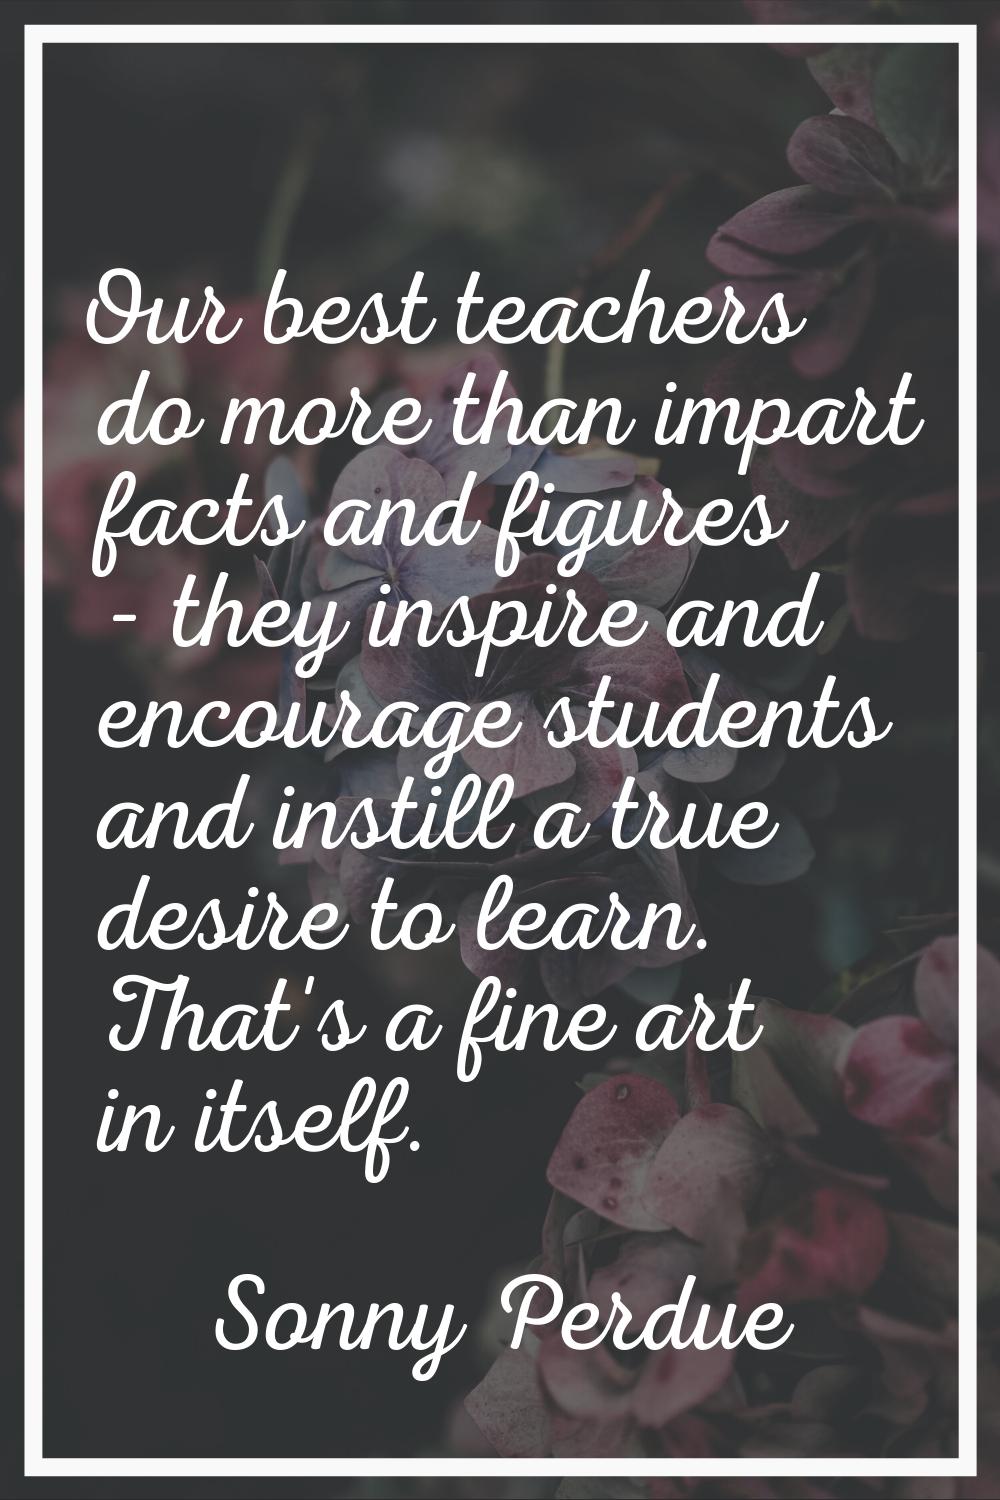 Our best teachers do more than impart facts and figures - they inspire and encourage students and i